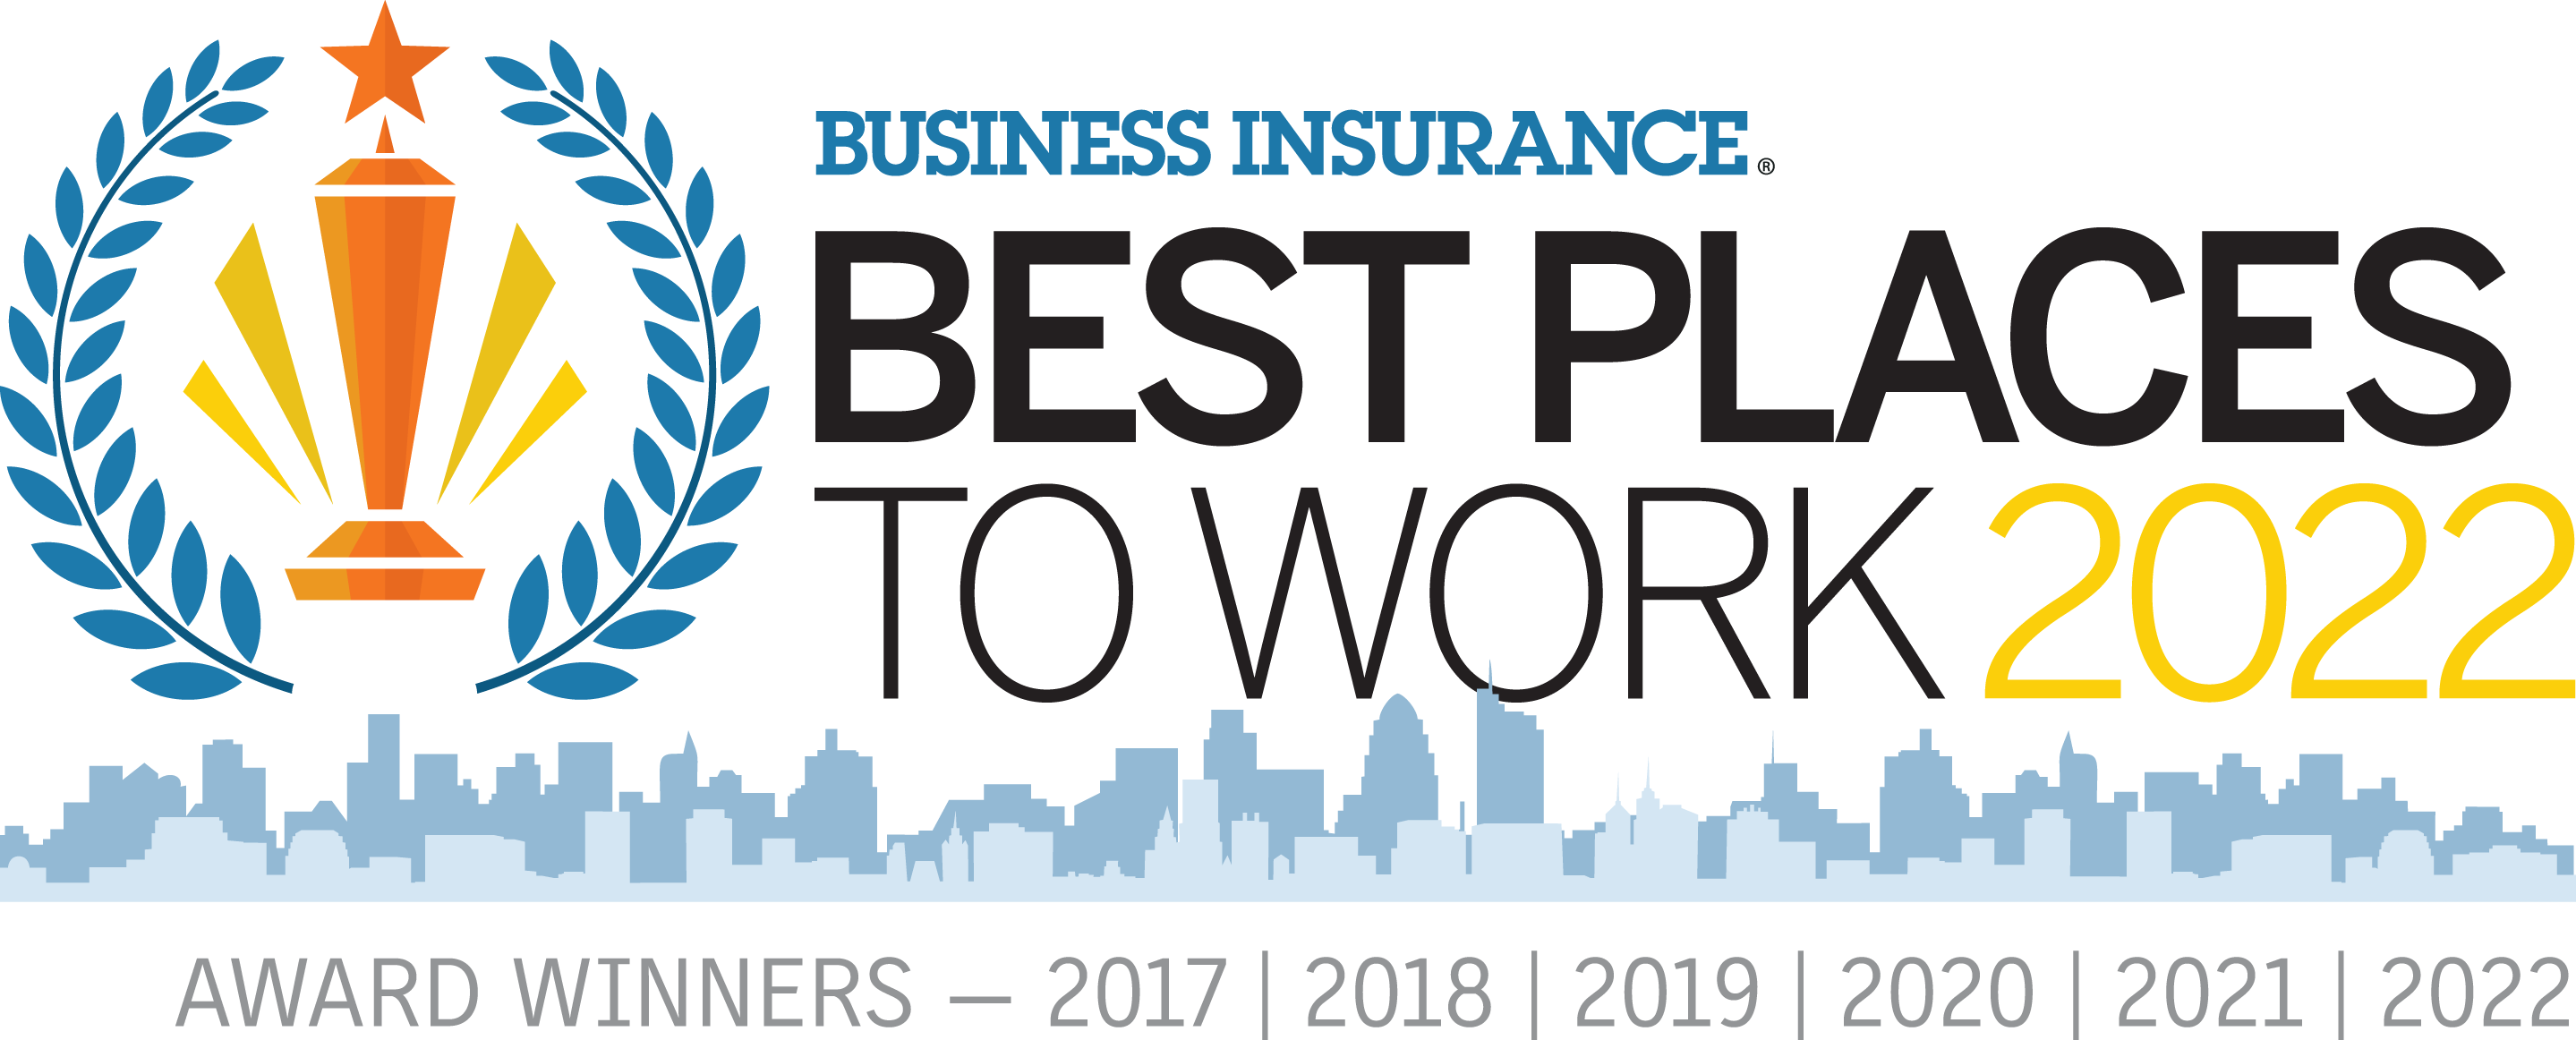 Best Insurance, Best Place to work 2022 award image